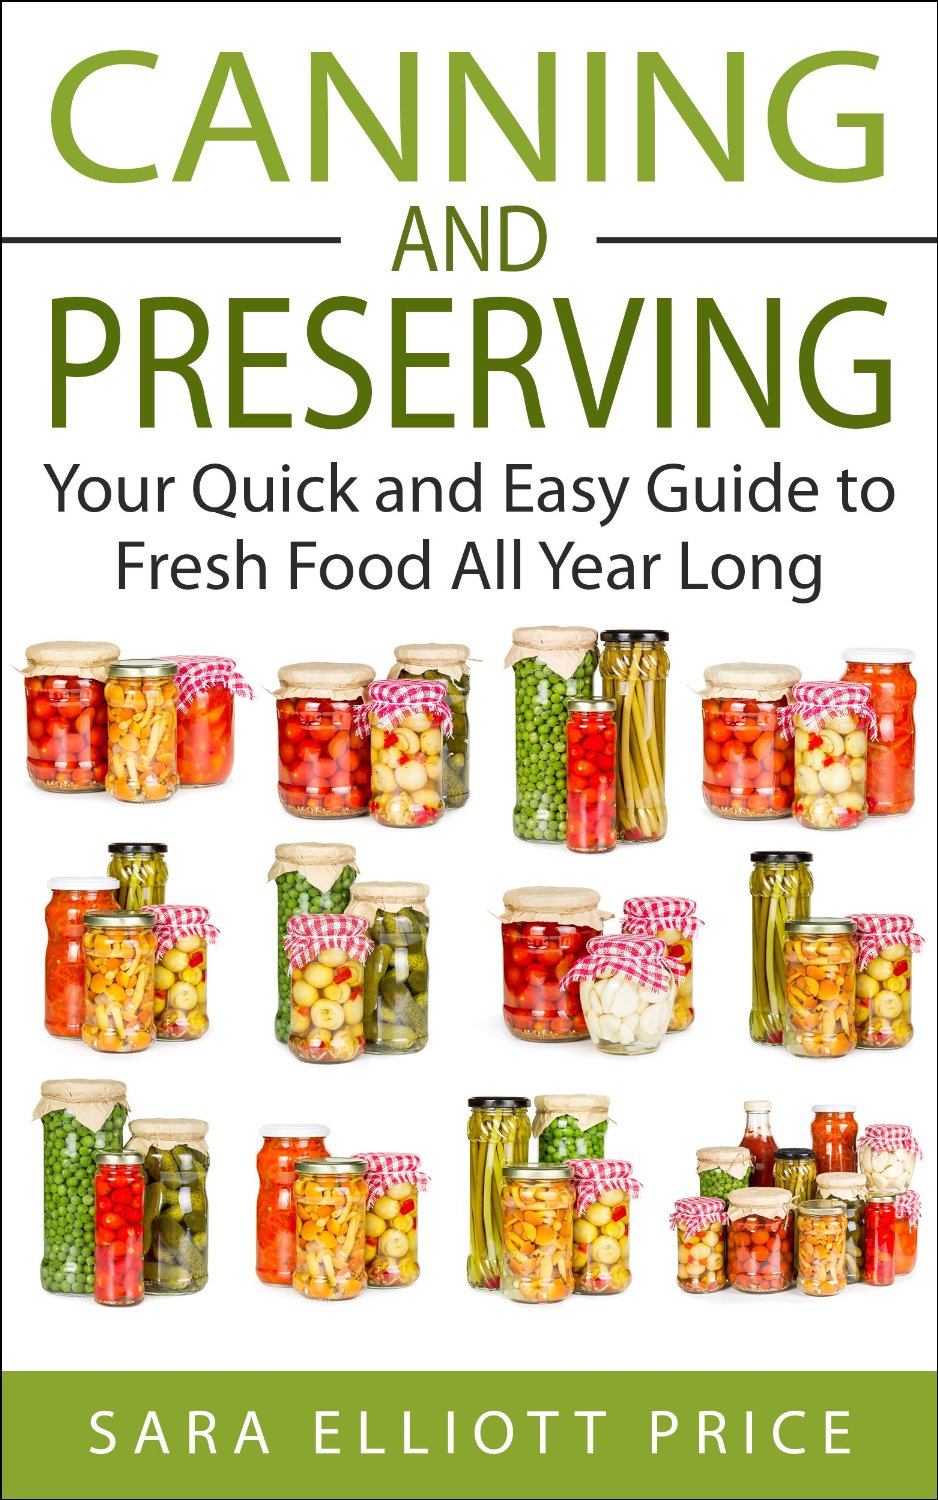 Canning and Preserving: Your Quick and Easy Guide to Fresh Food All Year Long by Sara Elliott Price